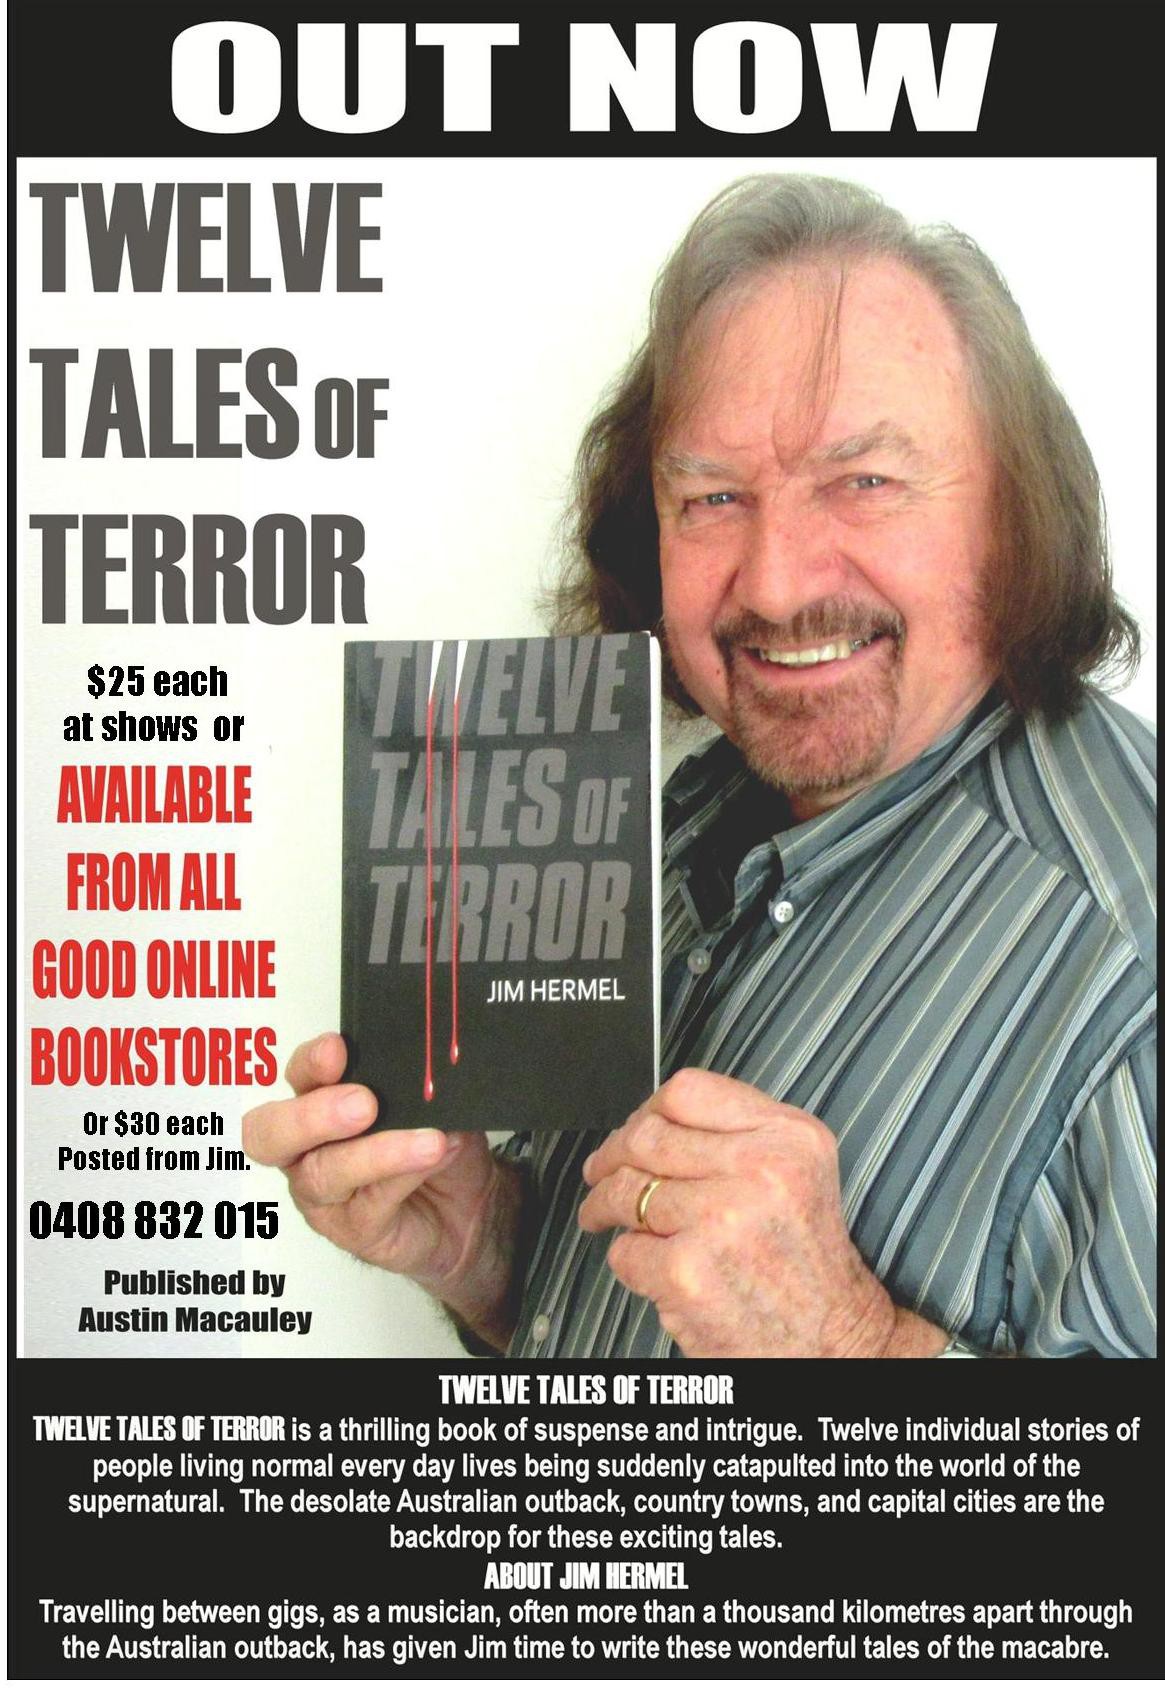 ‘Twelve Tales of Terror’ by Jim Hermel gets a Magazine Feature